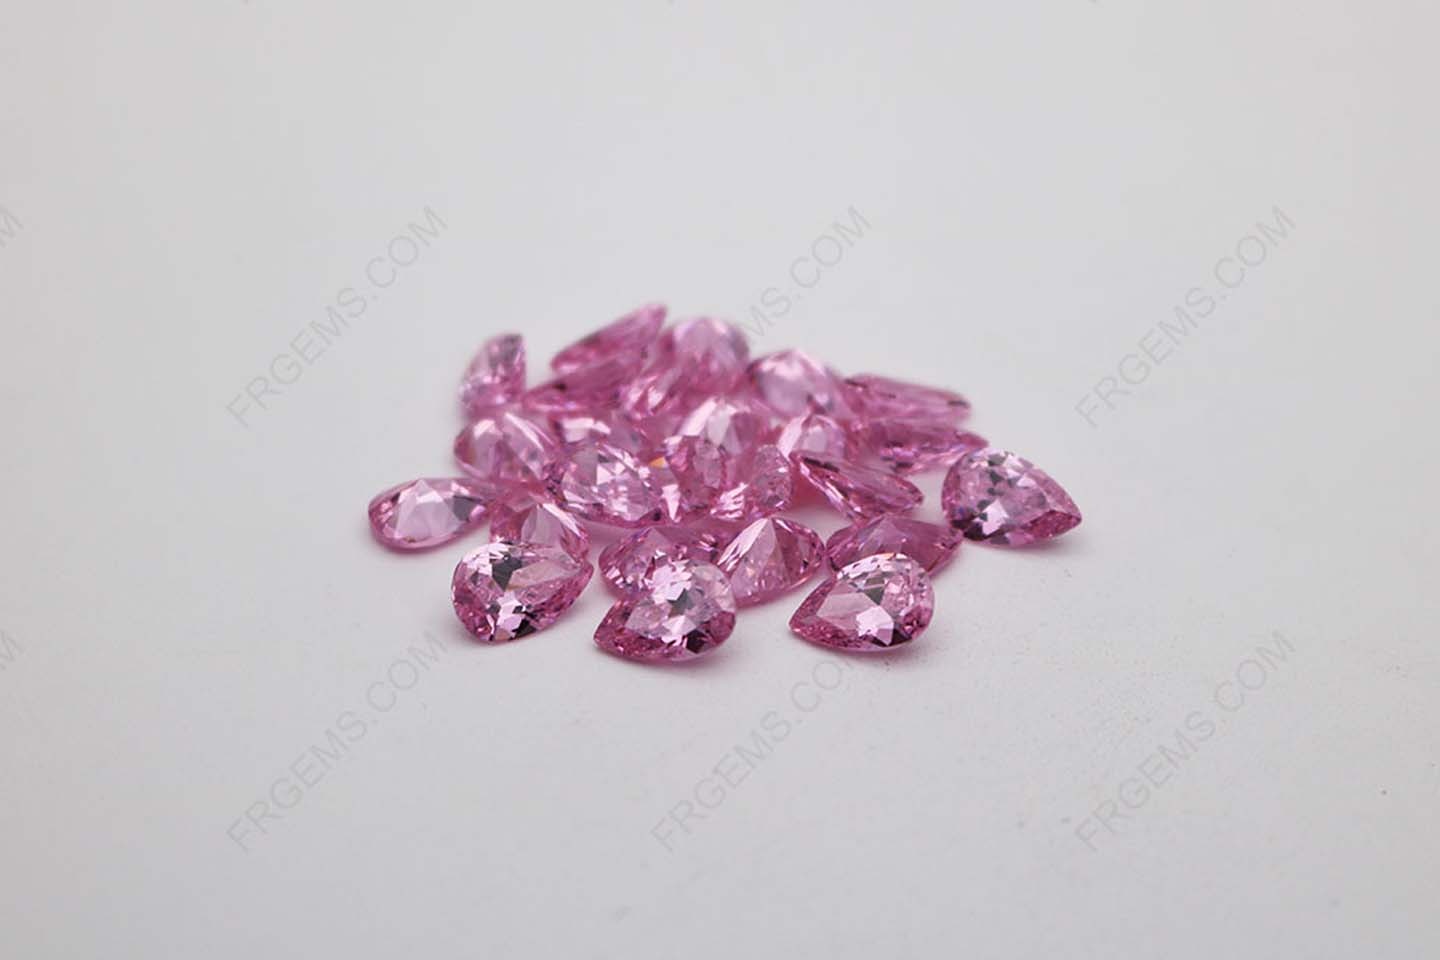 Cubic Zirconia Pink Pear Shape diamond faceted cut 7x5mm stones CZ03 IMG_1225